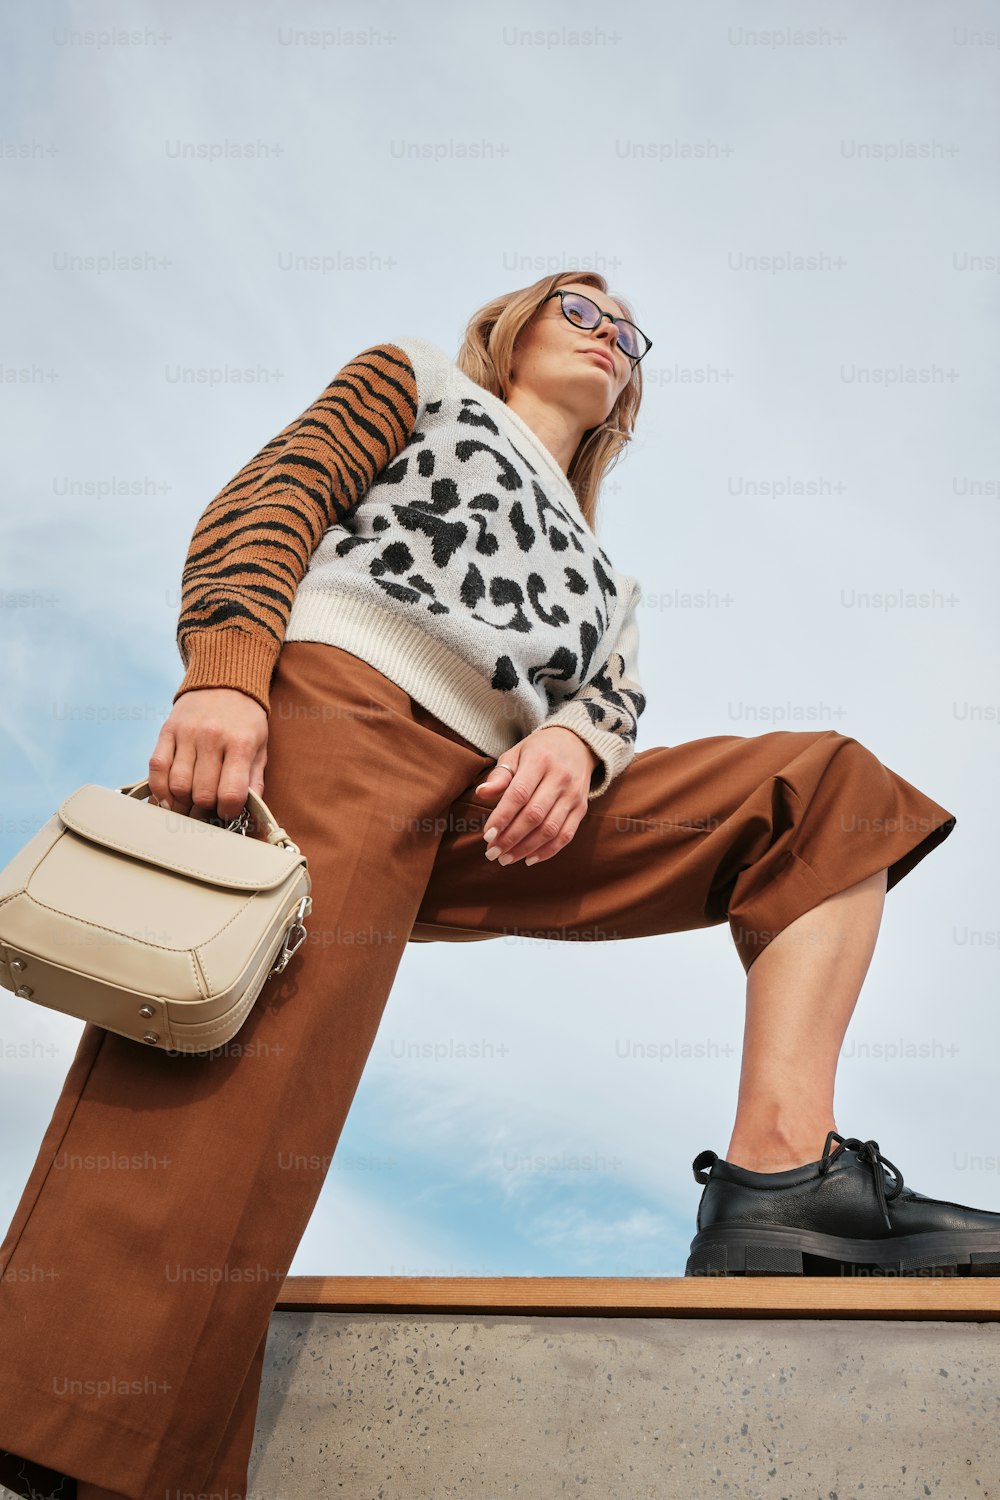 a woman sitting on a ledge holding a suitcase